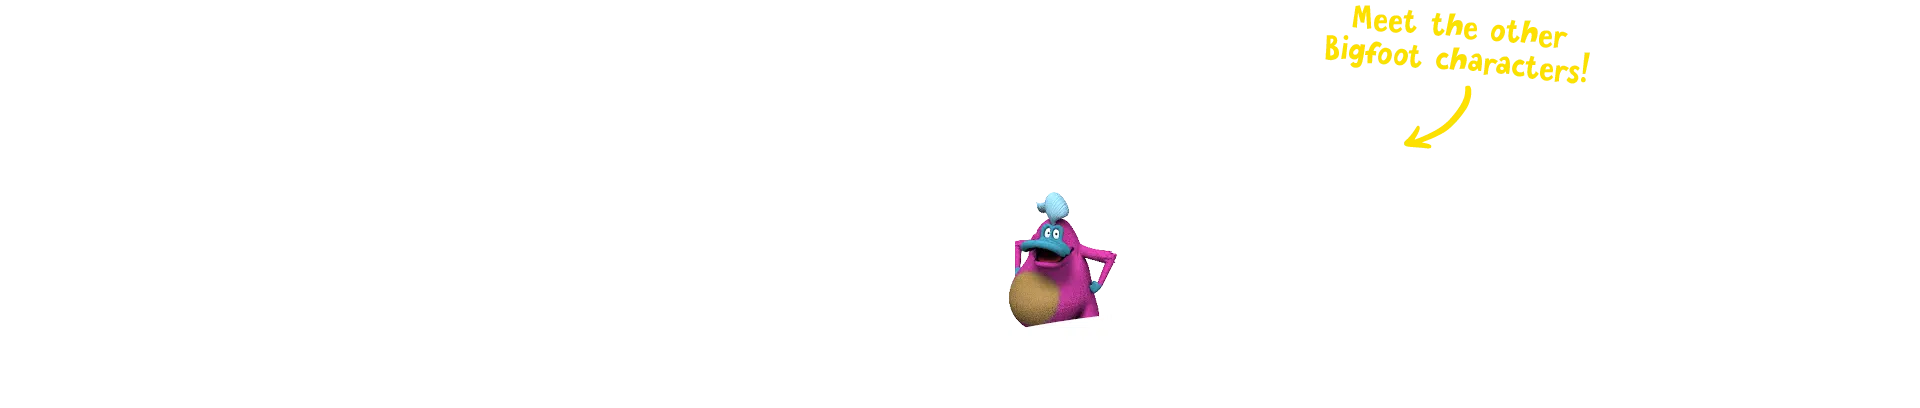 Squish Silhouette Curve Updated